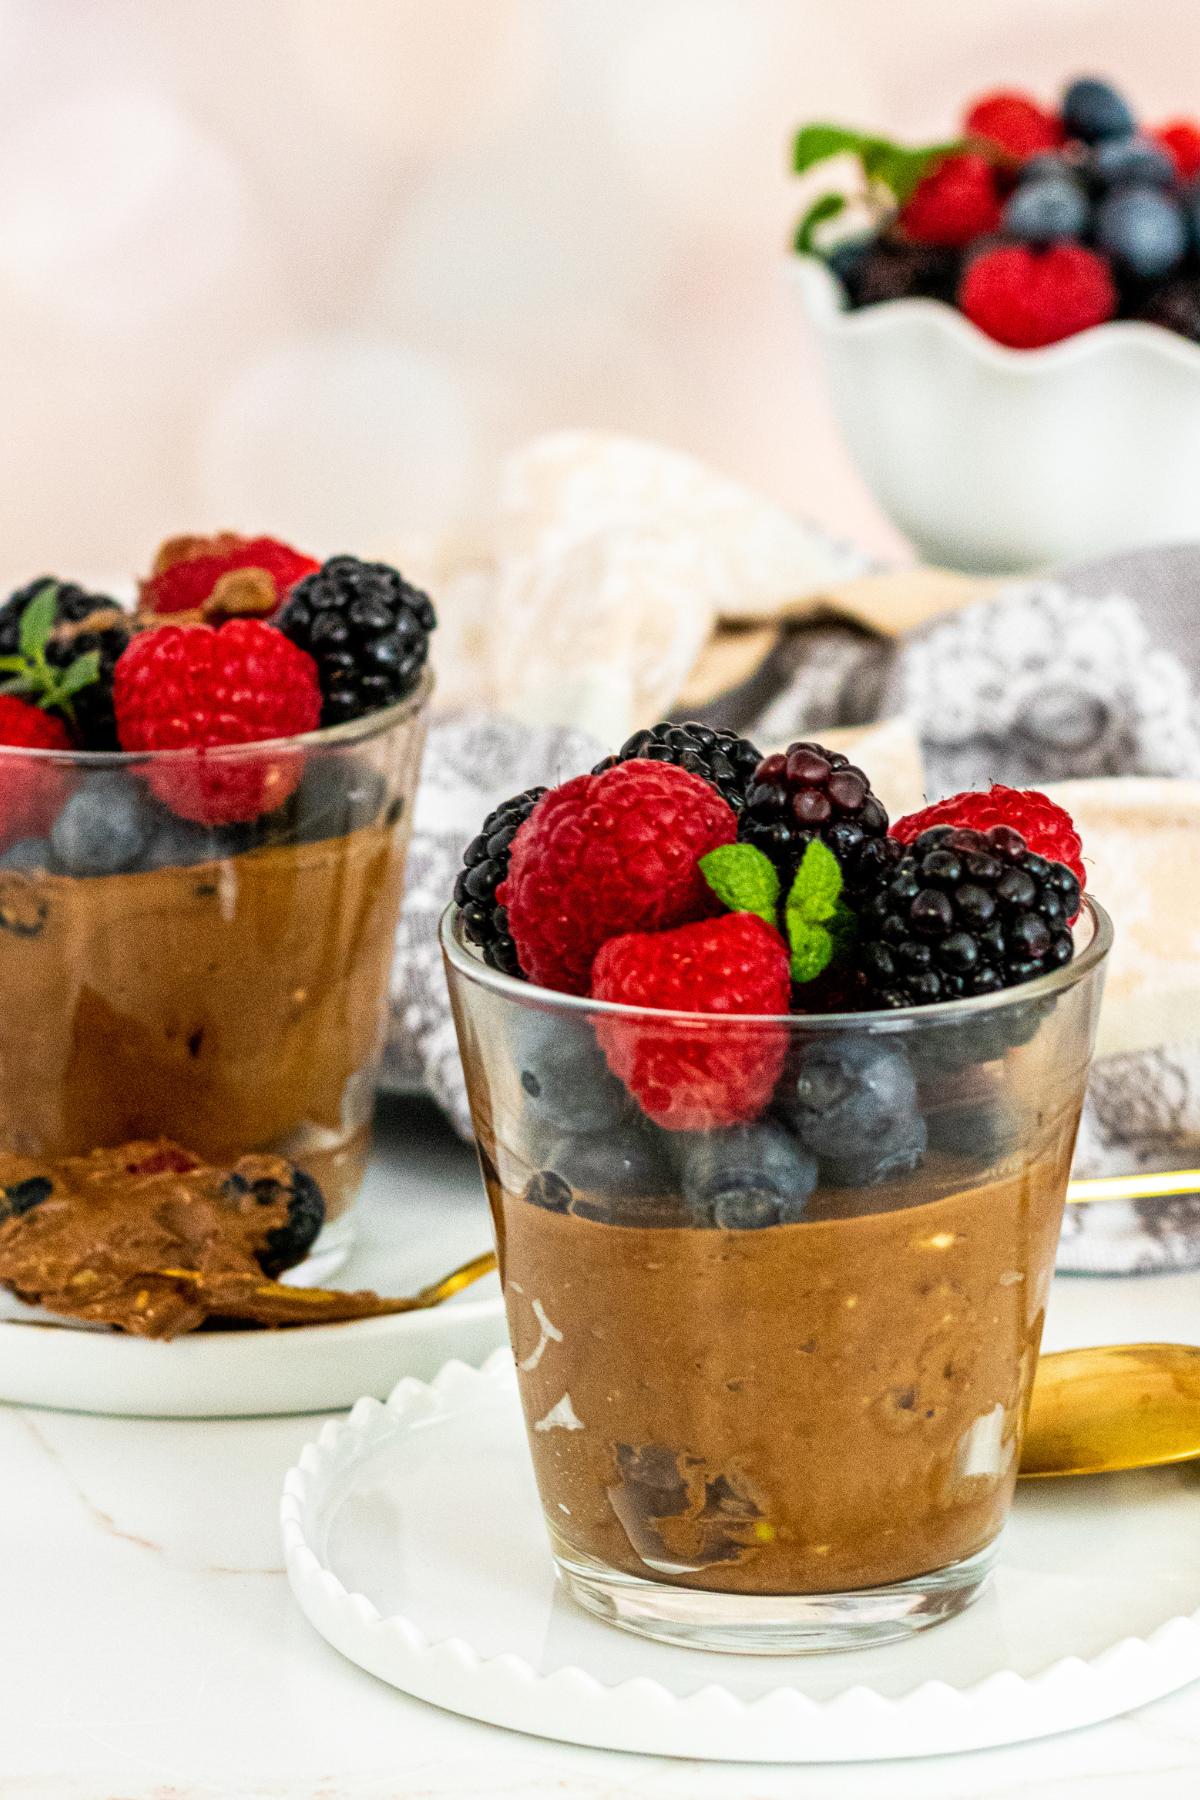 Glasses of mousse topped with berries and a bowl of berries in the background.